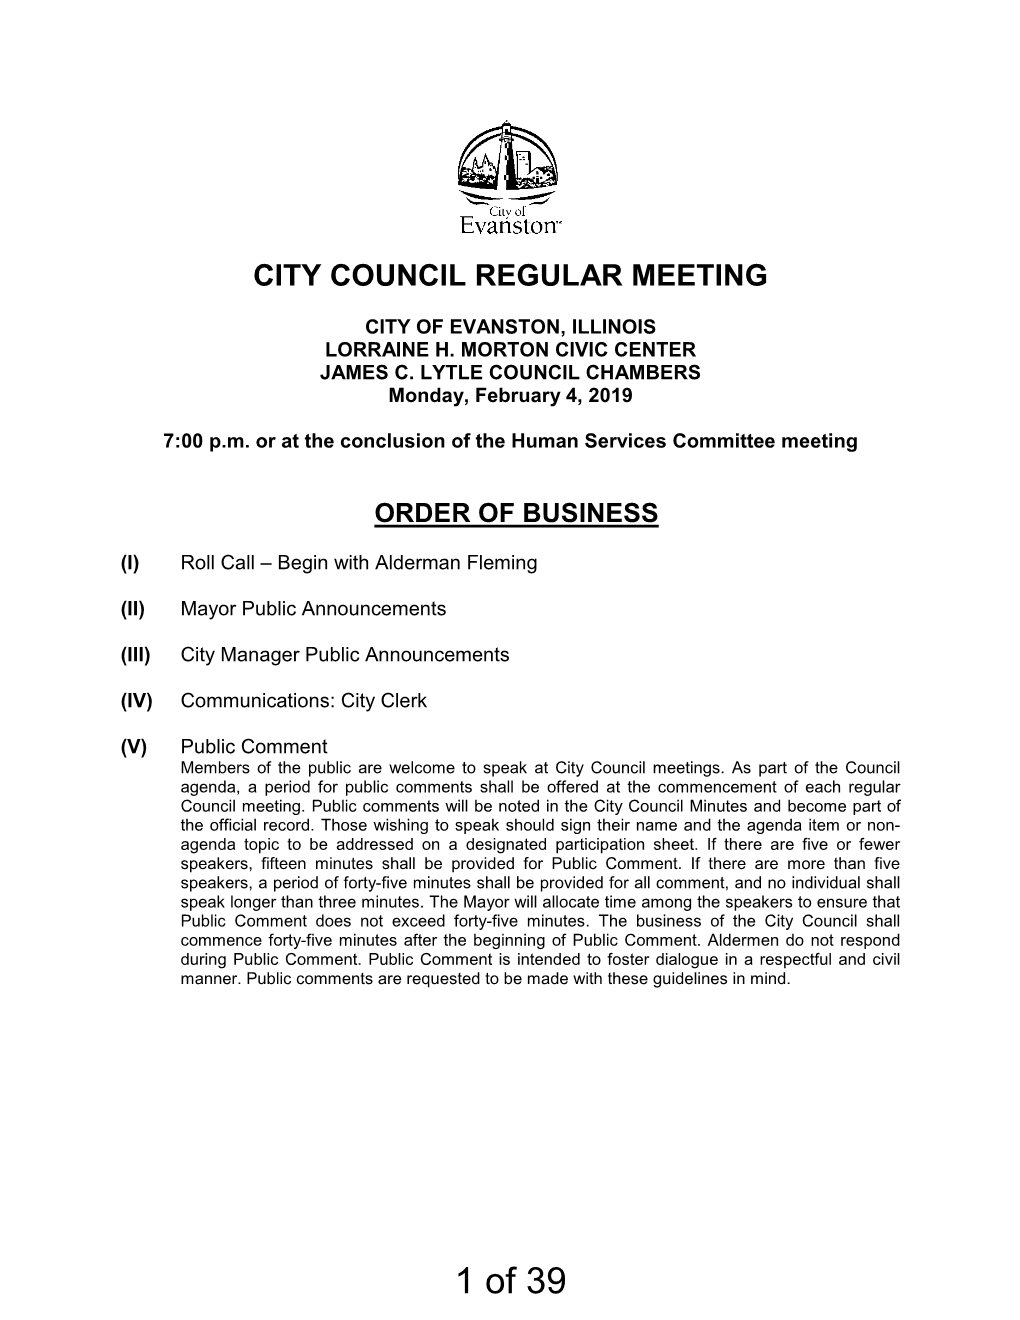 1 of 39 City Council Agenda February 4, 2019 Page 2 of 3